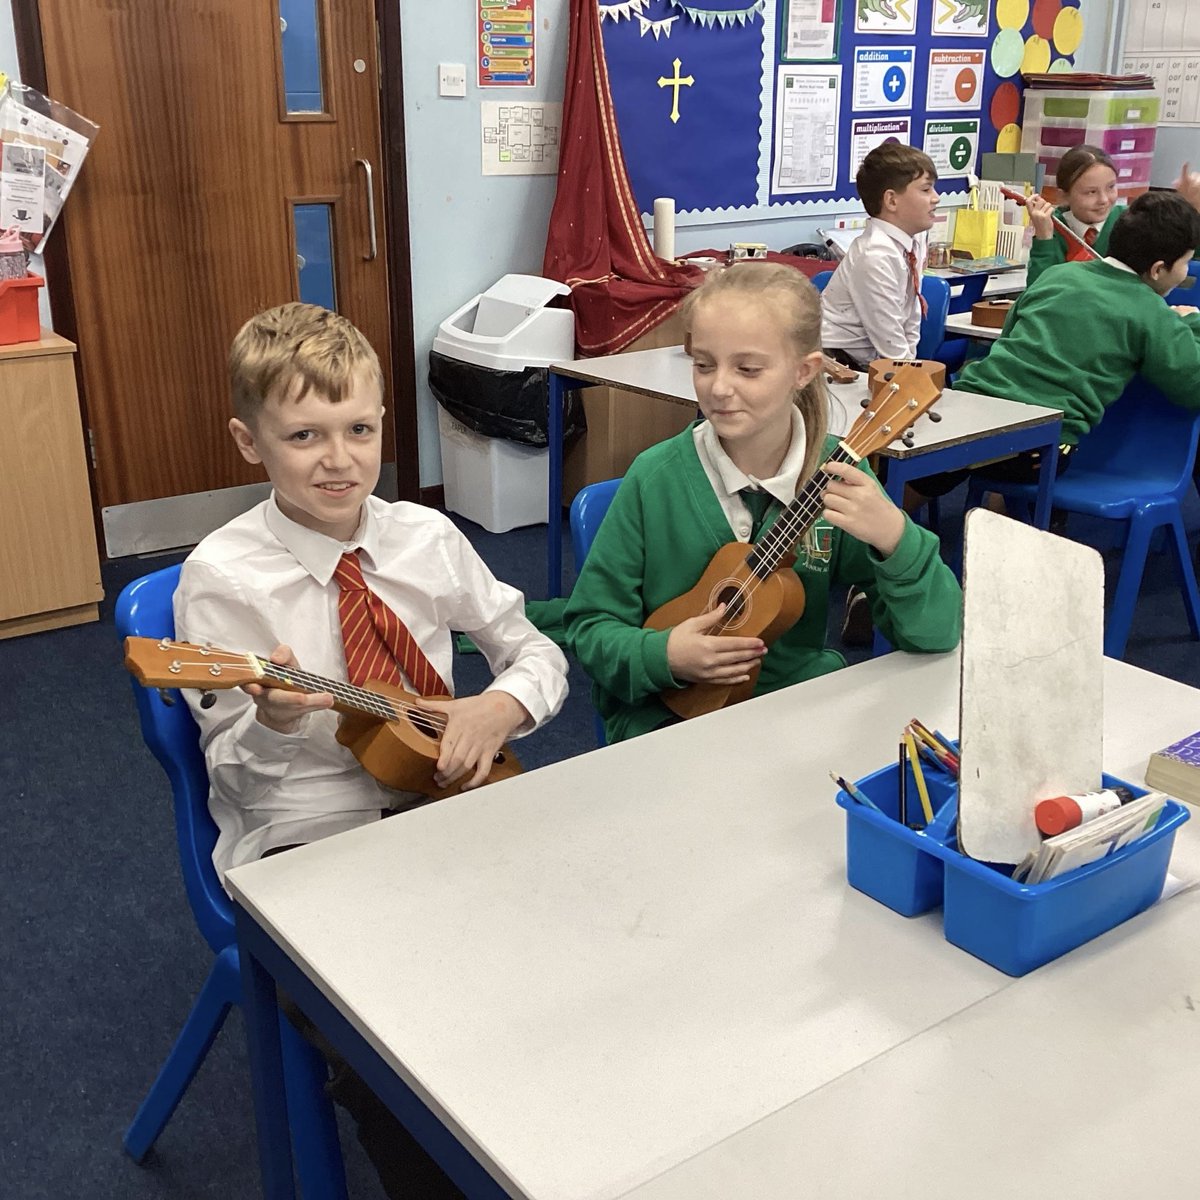 Exciting news for Year 6 at #stlaurence! They're continuing their Ukelele lessons with Mr. Inkpen from Kent Music. Can't wait to hear them at the Reading Festival at the end of the year! 🎶🎉 @AquilaTrustUK @KentMusic